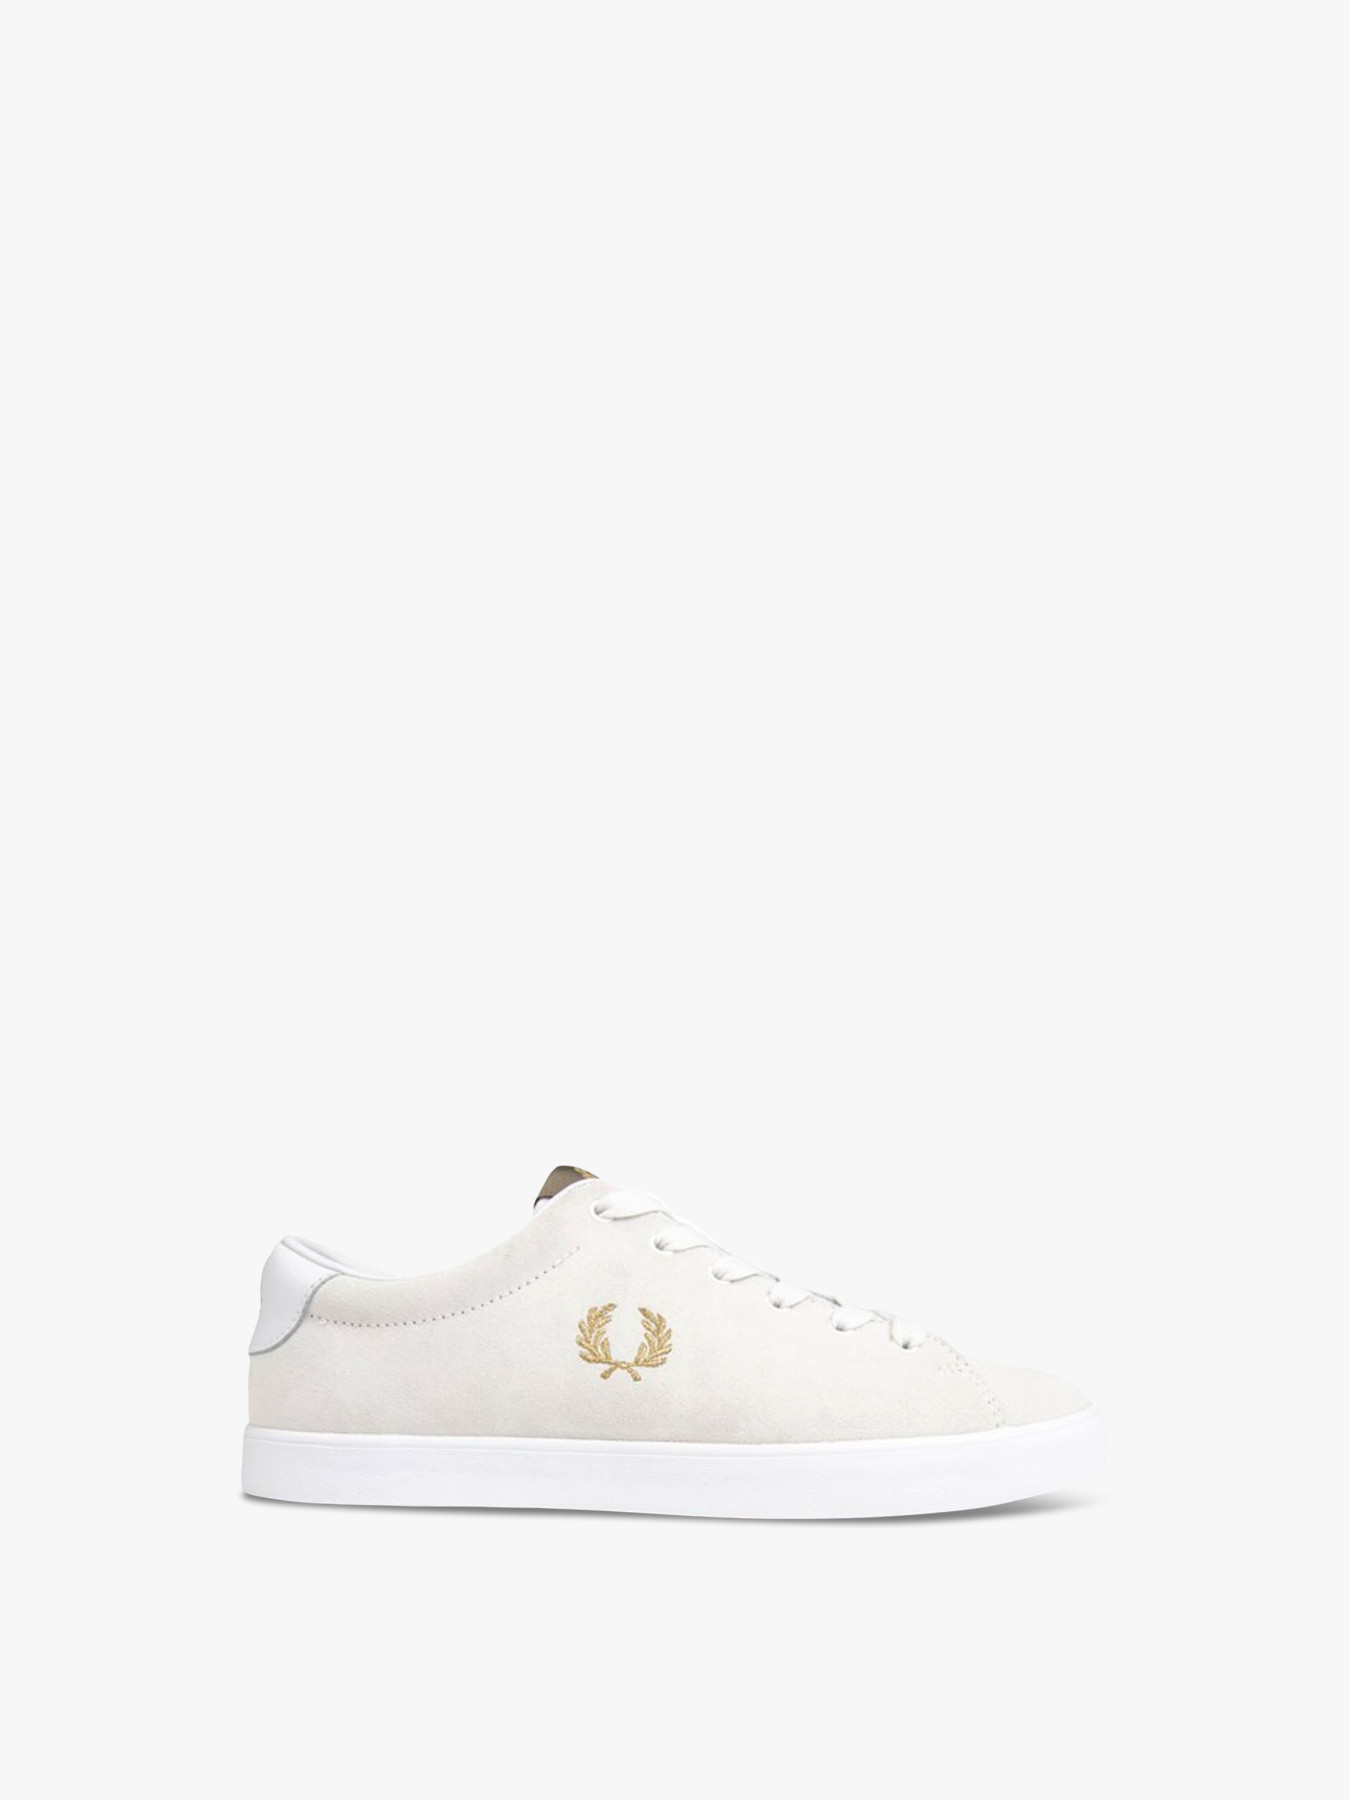 Fred Perry FRED PERRY Lottie Leather Trainers | Lace Up Trainers | Fenwick